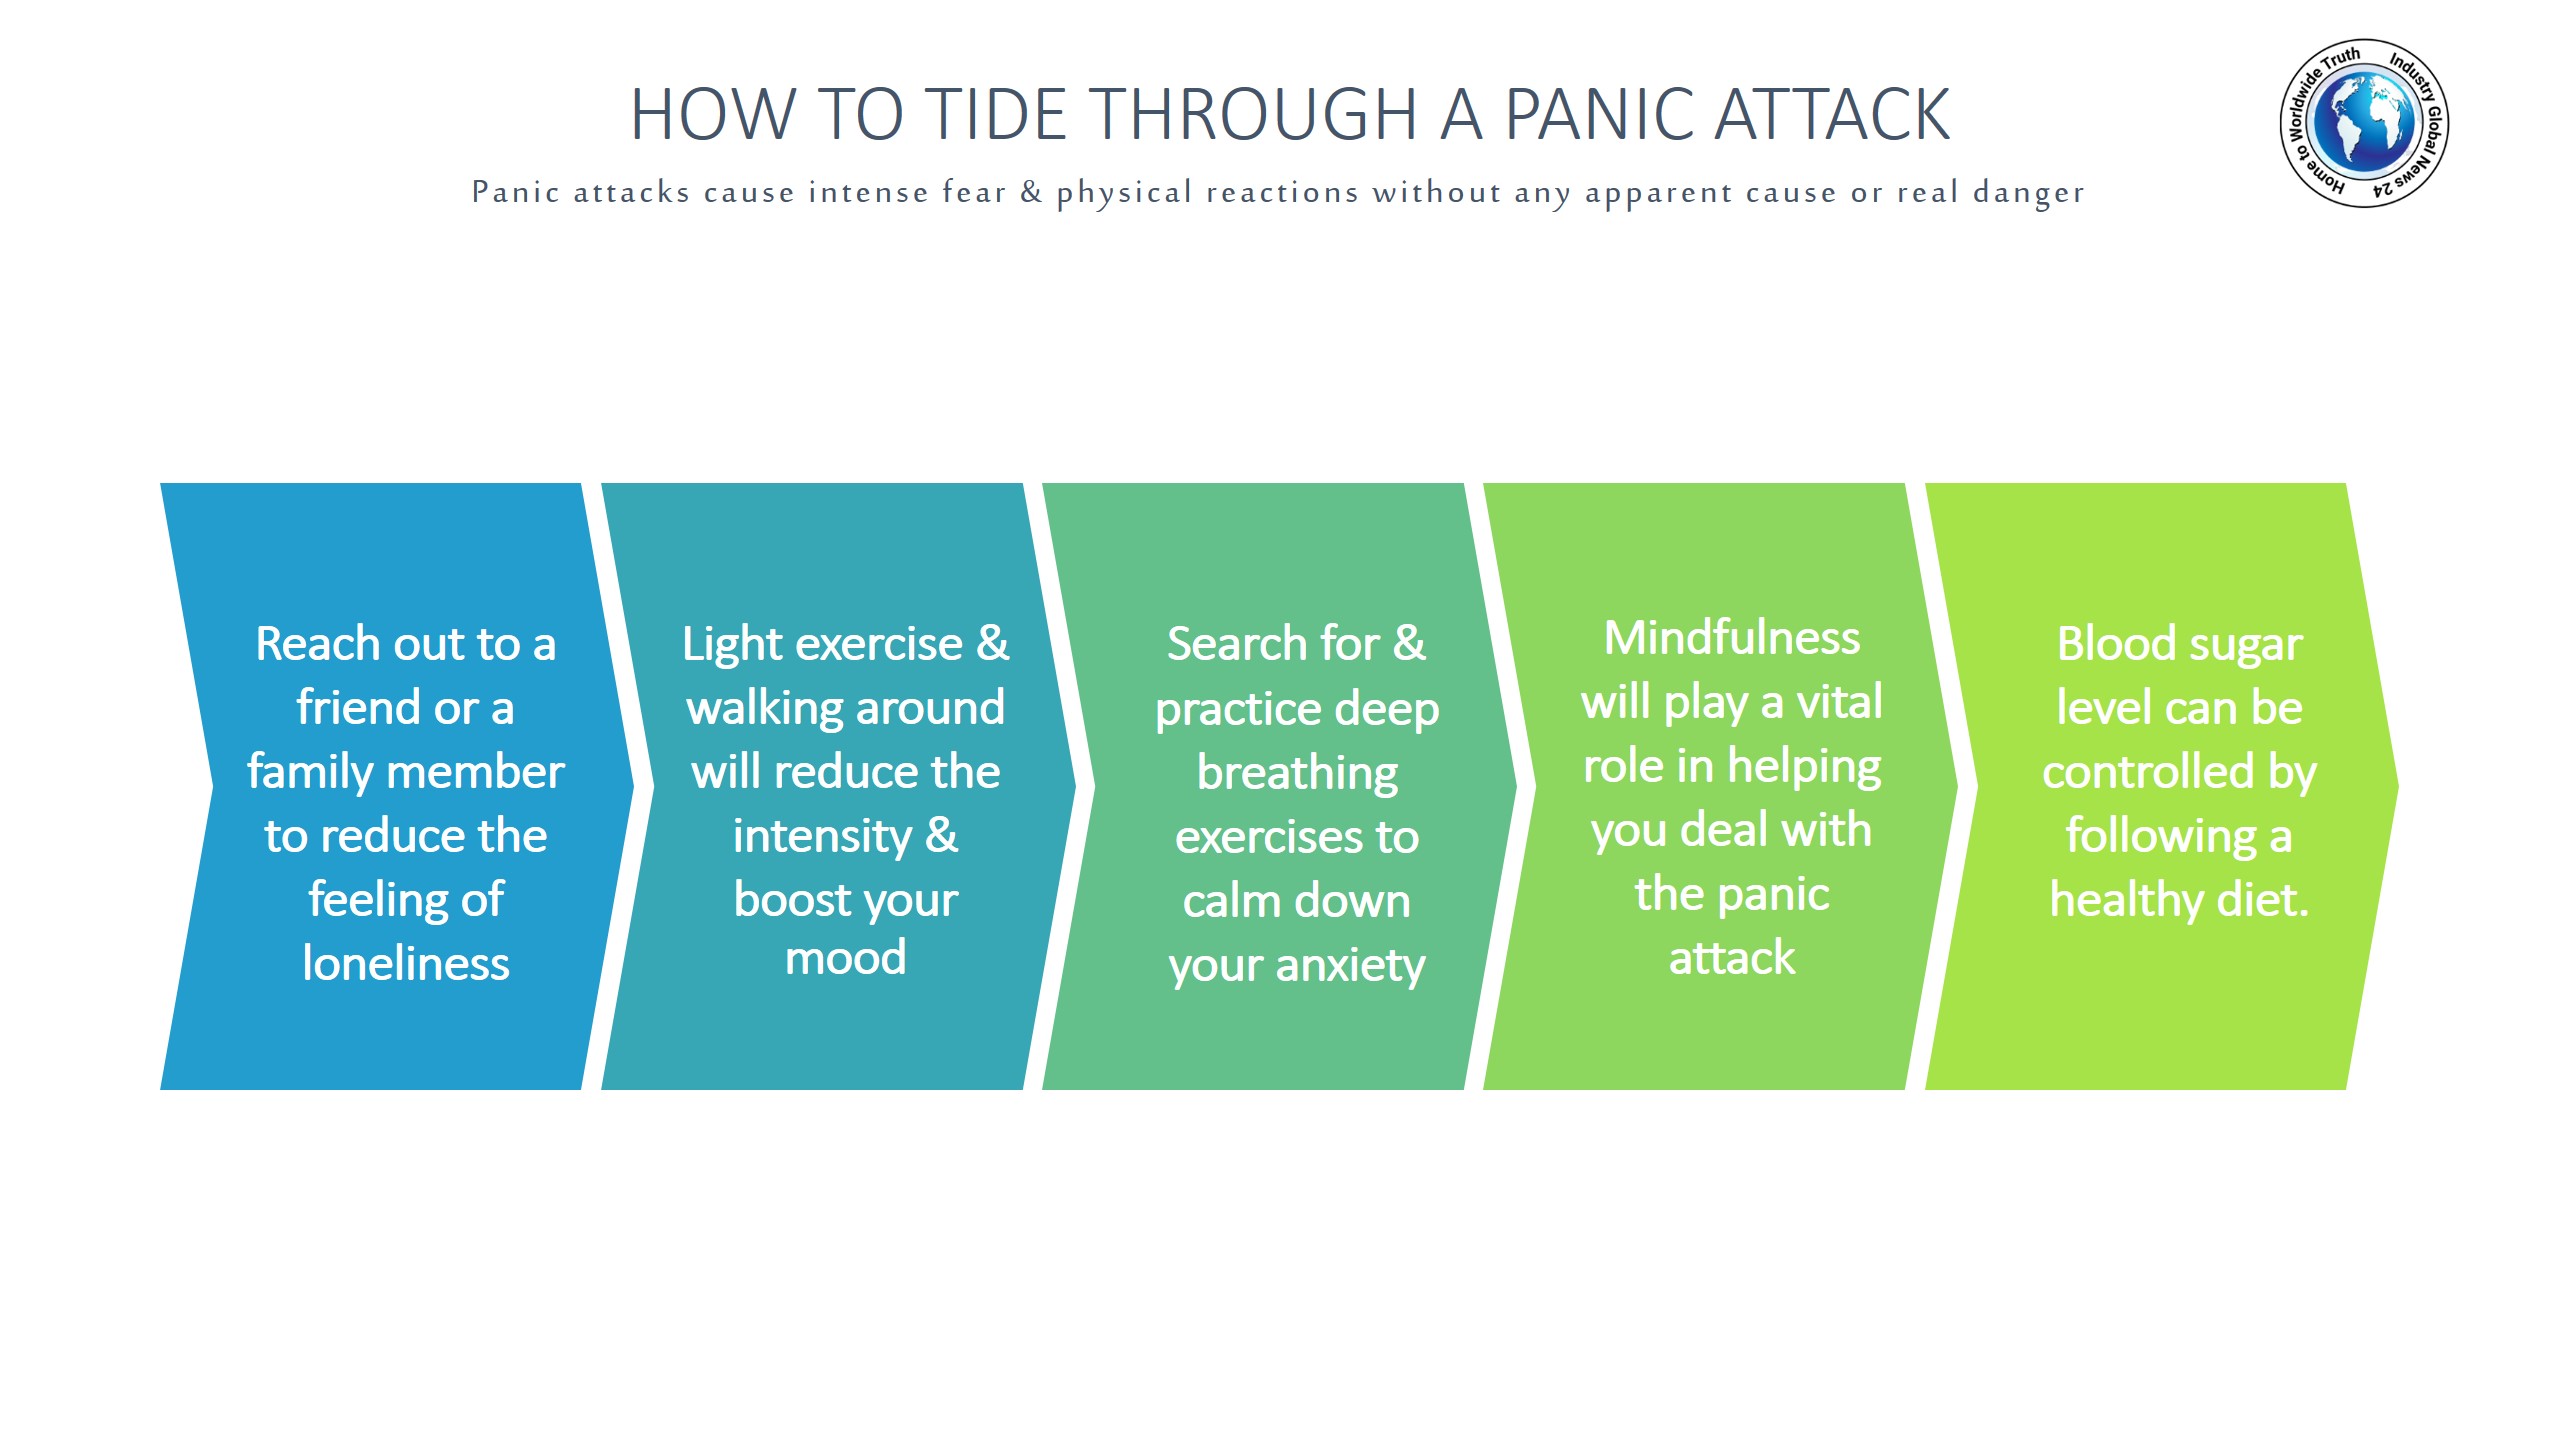 How to tide through a panic attack